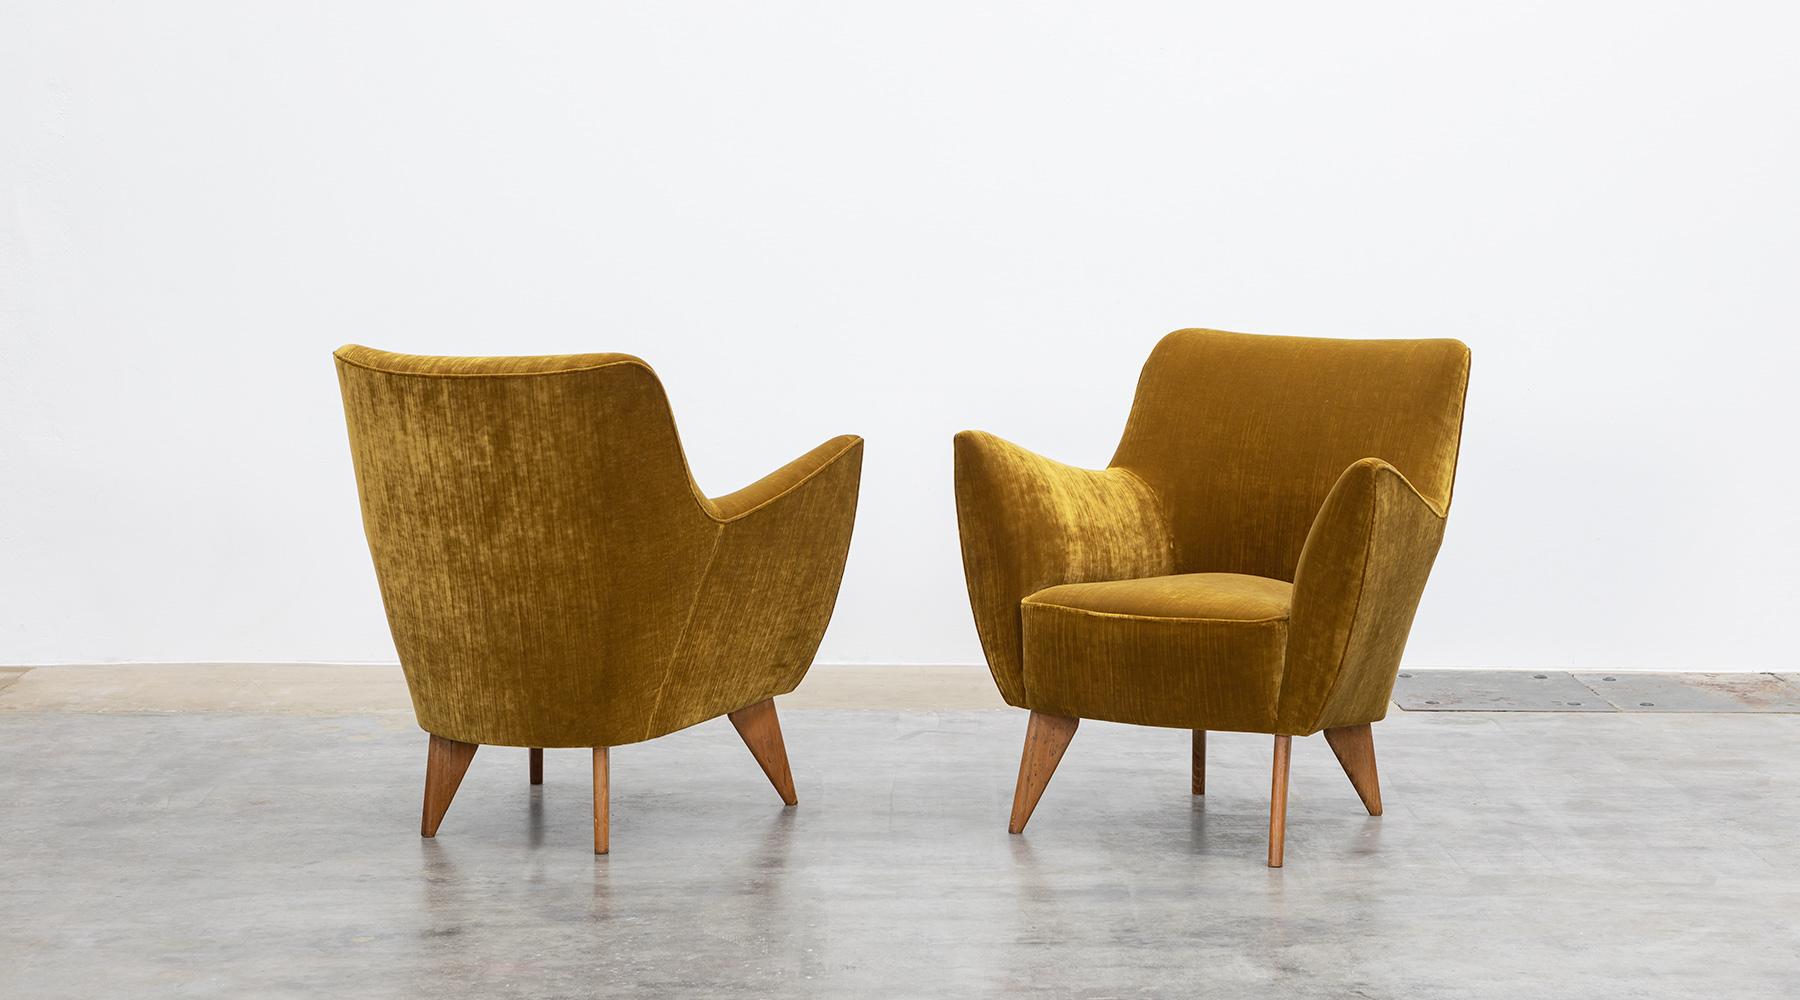 New upholstery in ocra yellow high-quality fabric, lounge chairs by Guglielmo Veronesi, Italy, 1952.

A pair of lounge chairs designed by Guglielmo Veronesi. Its sensual curves and the elegantly tapered legs give the chairs a sculptural and modern